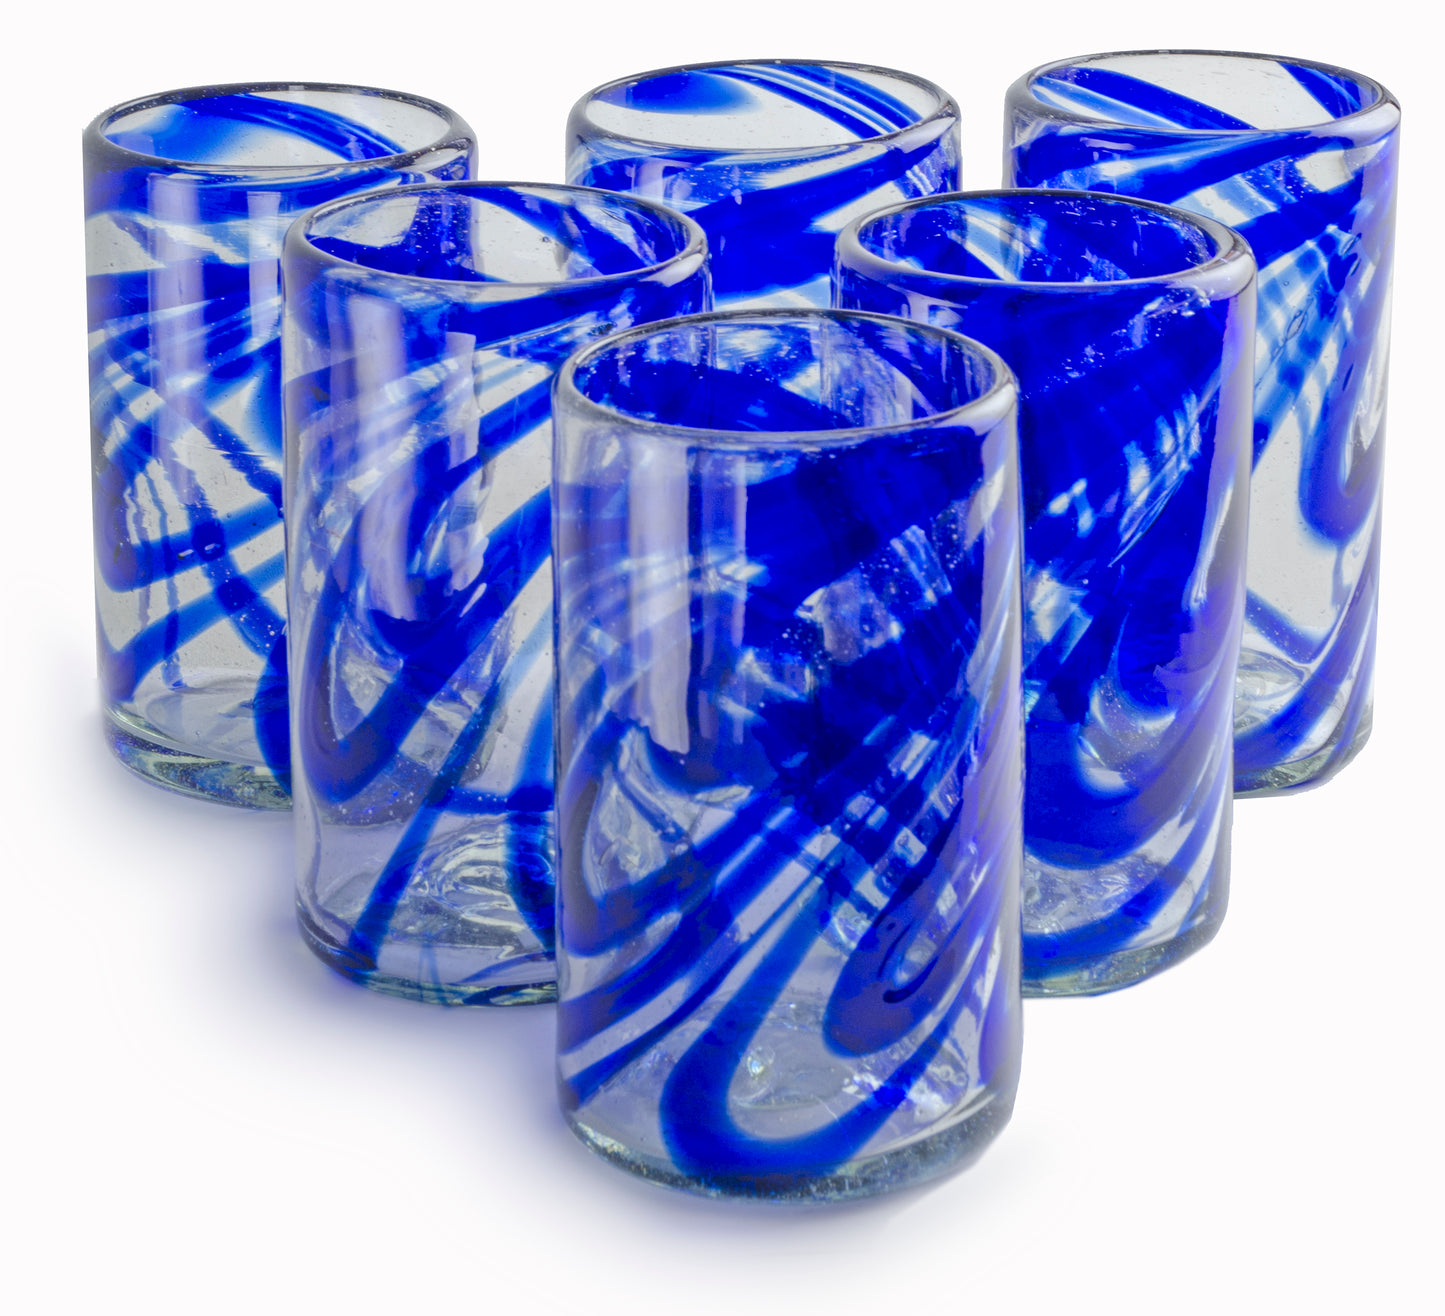 Orion Blue Swirl 16 oz Tumbler - Set of 6 - Orion's Table Mexican Glassware